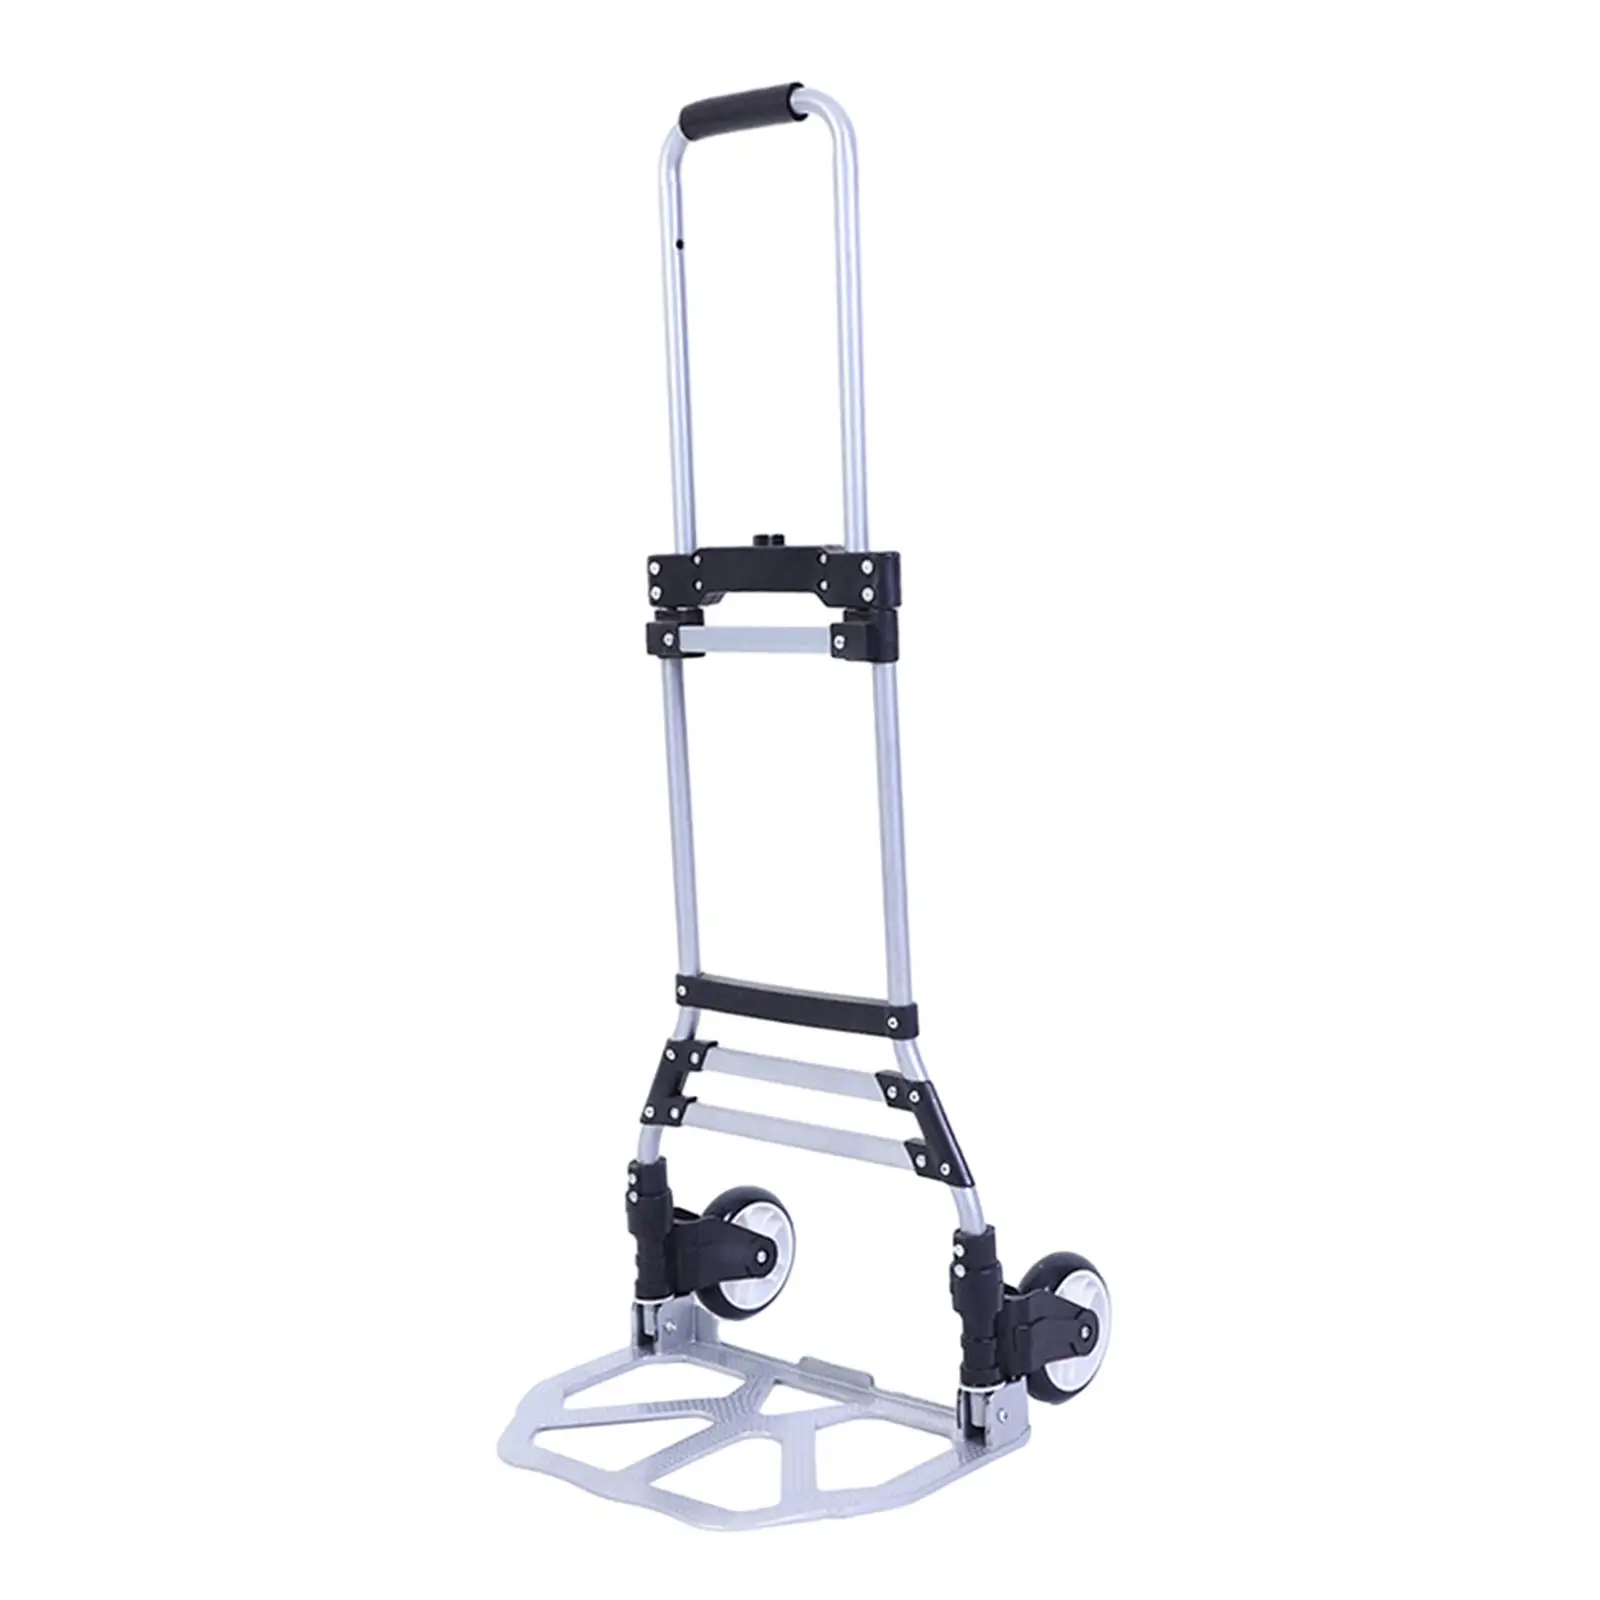 Folding Luggage Trolley, Foldable Hand Cart, Adjustable Luggage Cart for Moving Transportation Camping